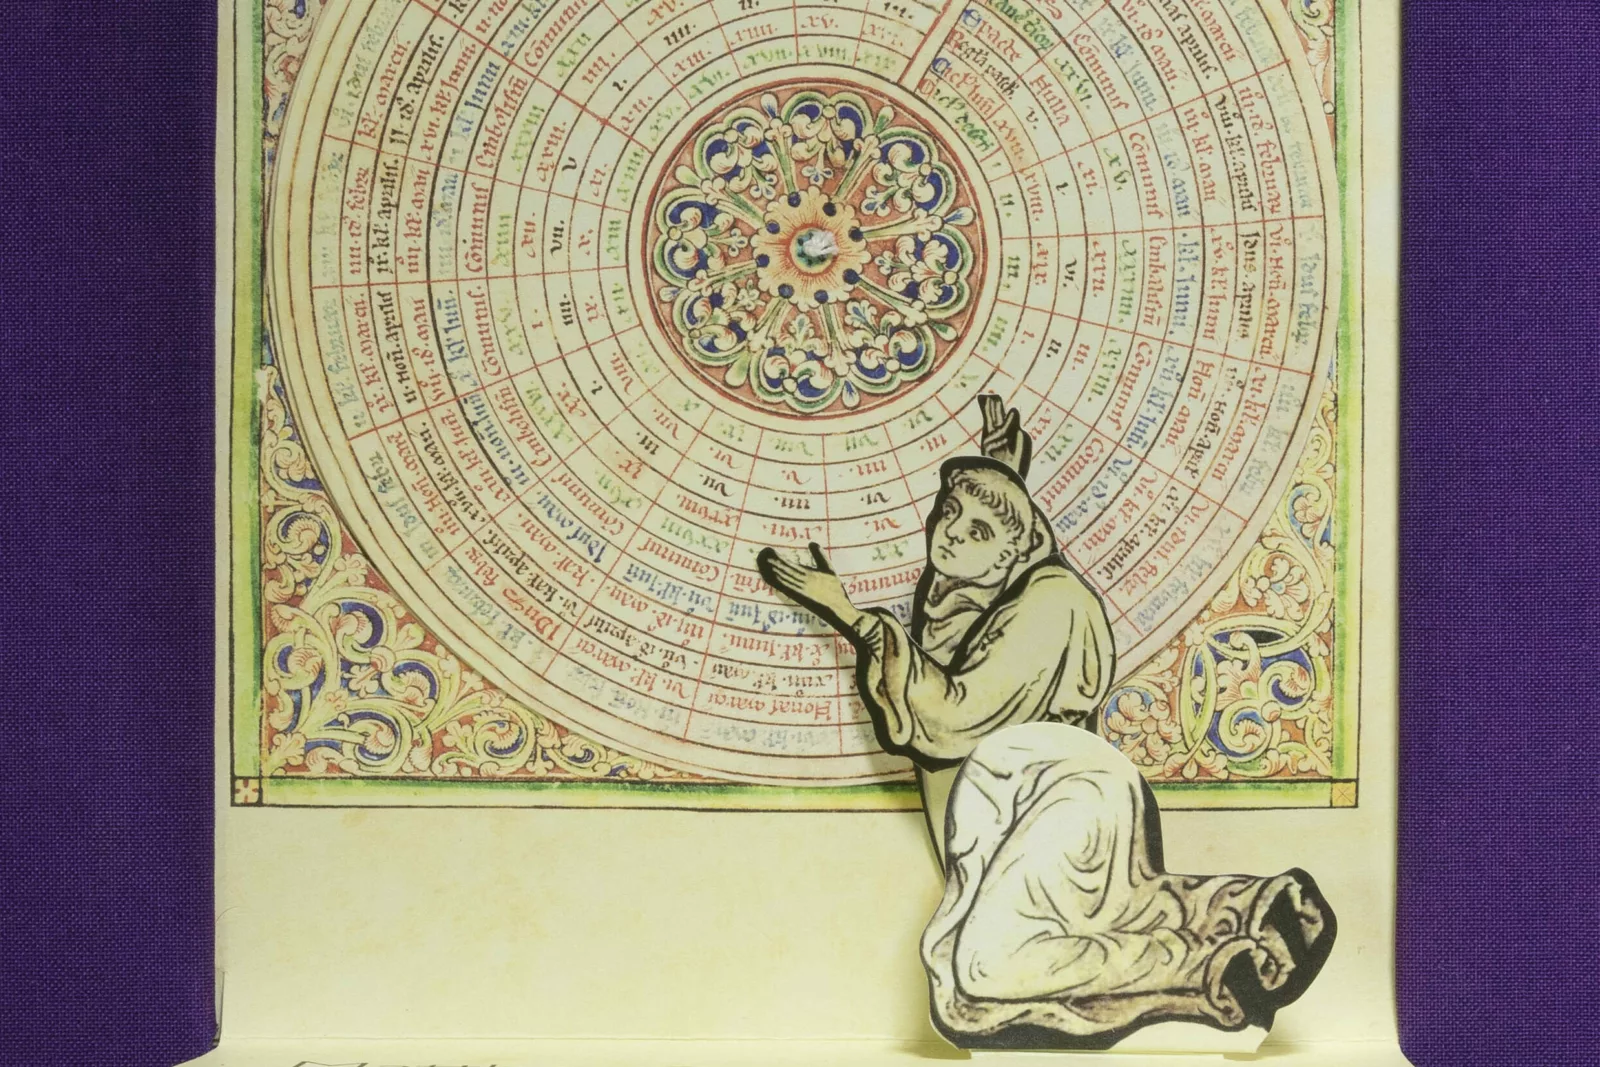 A monk kneels in front of concentric circles.